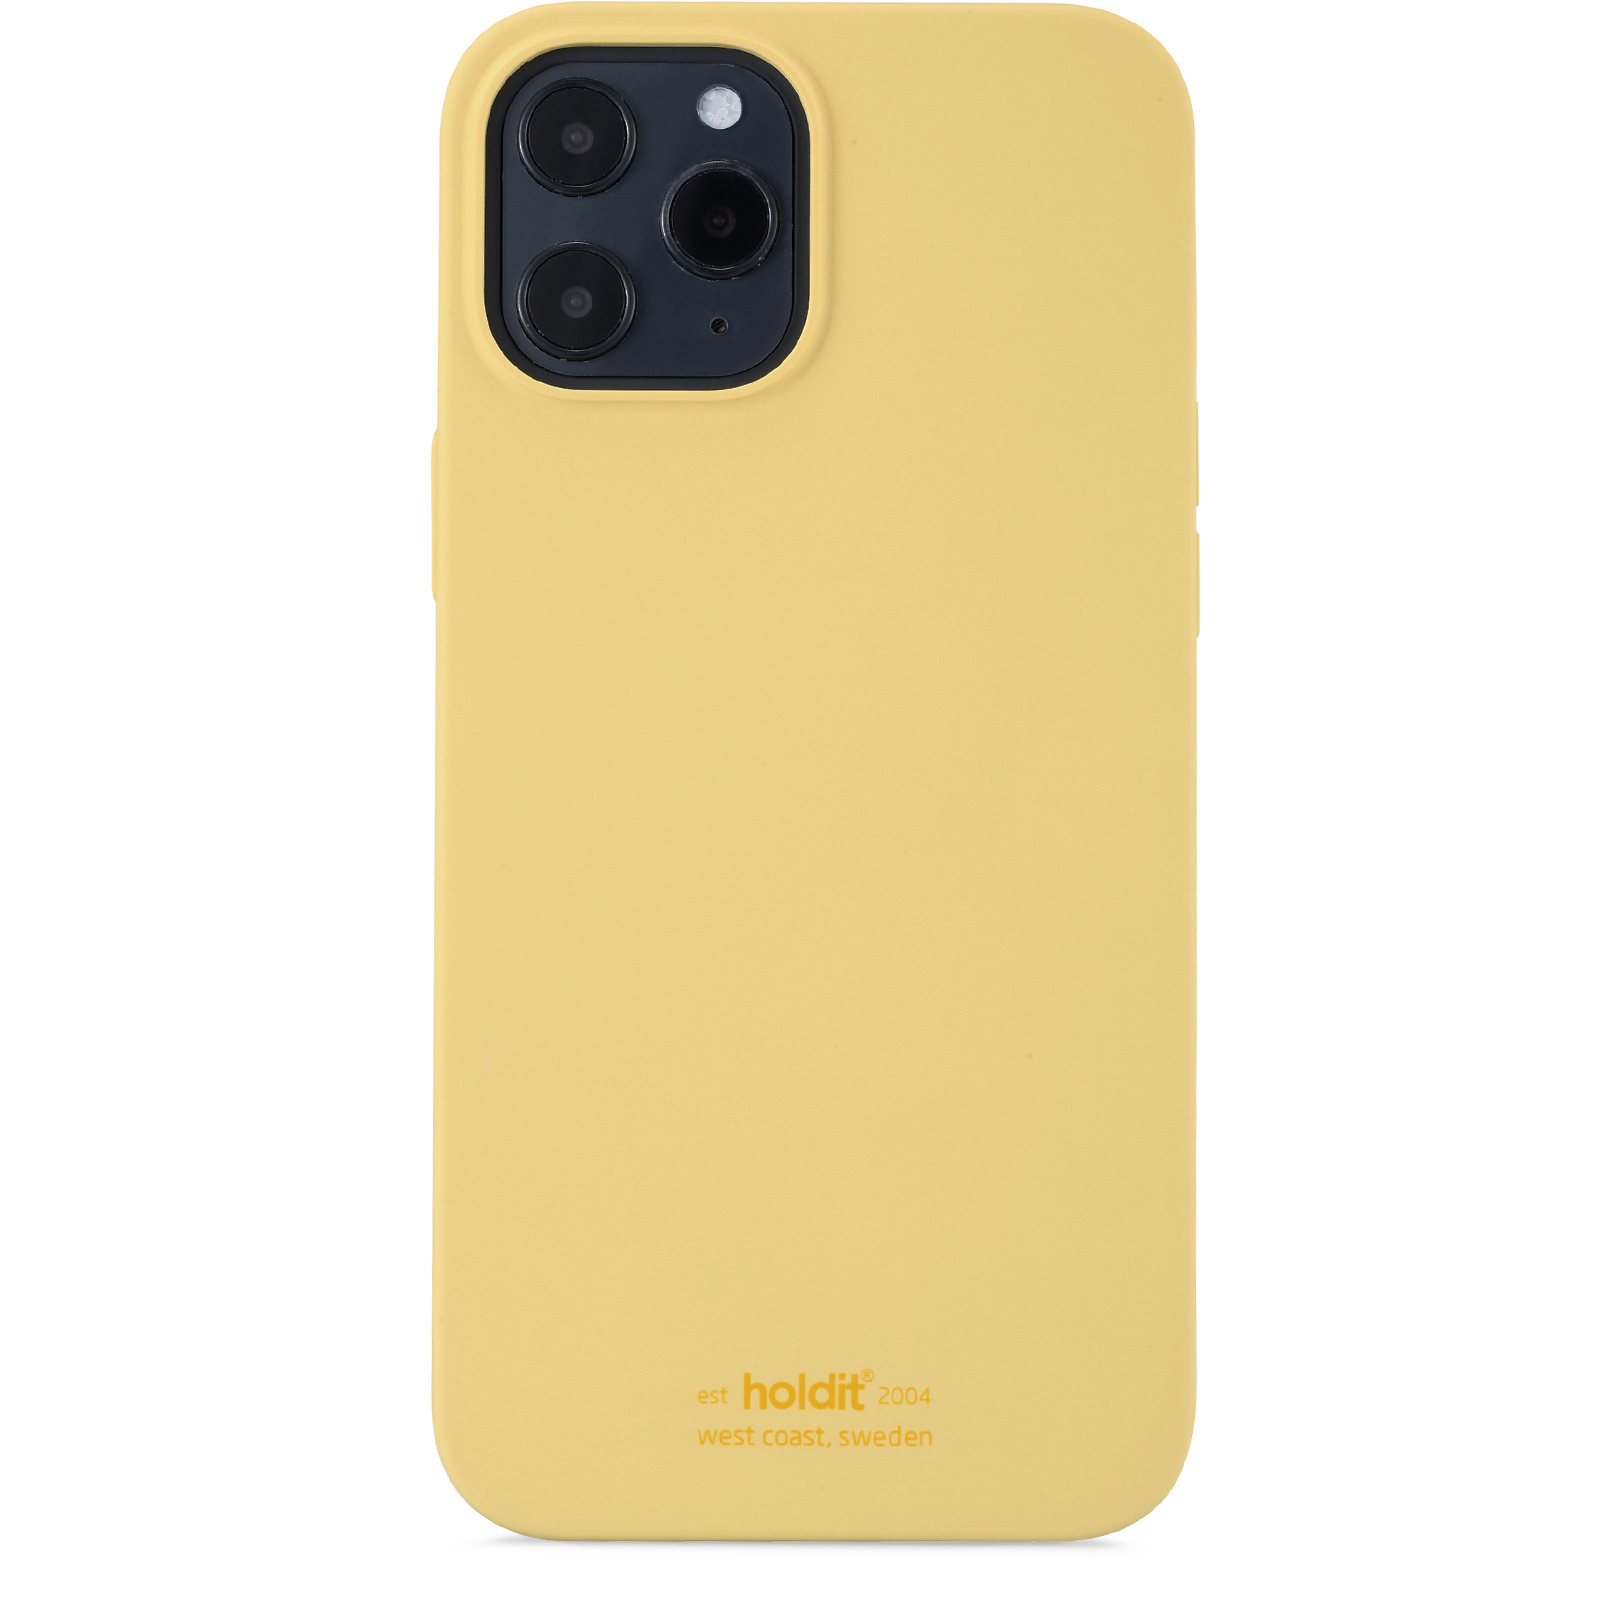 iPhone 12 Pro Max, case silicone, yellow